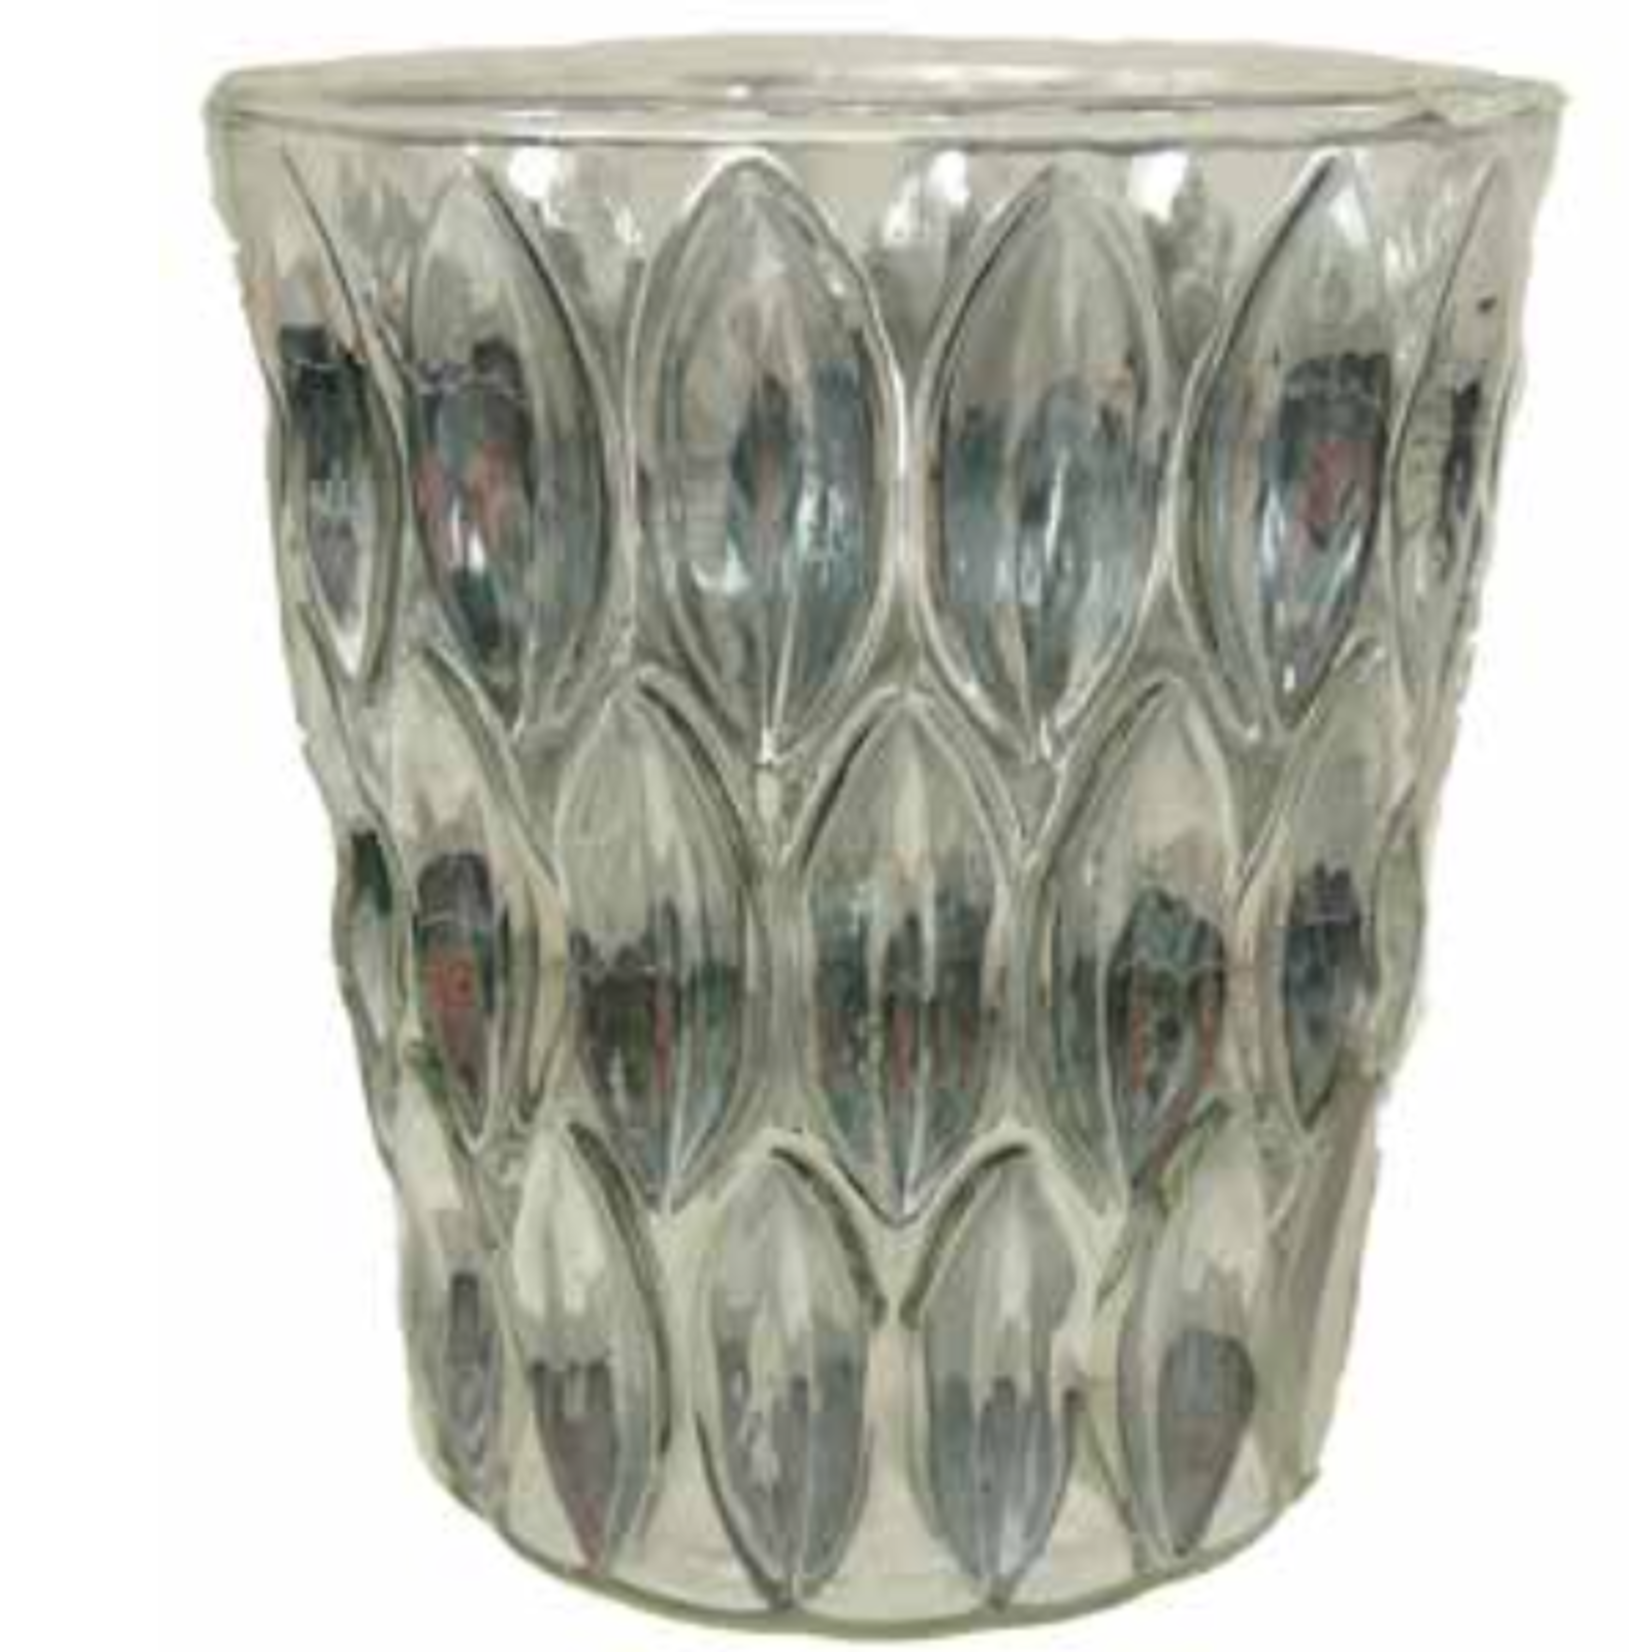 50% off was $6.99 now $3.49.  4.25”H X 3.75” SILVER REFLECTION VOTIVE